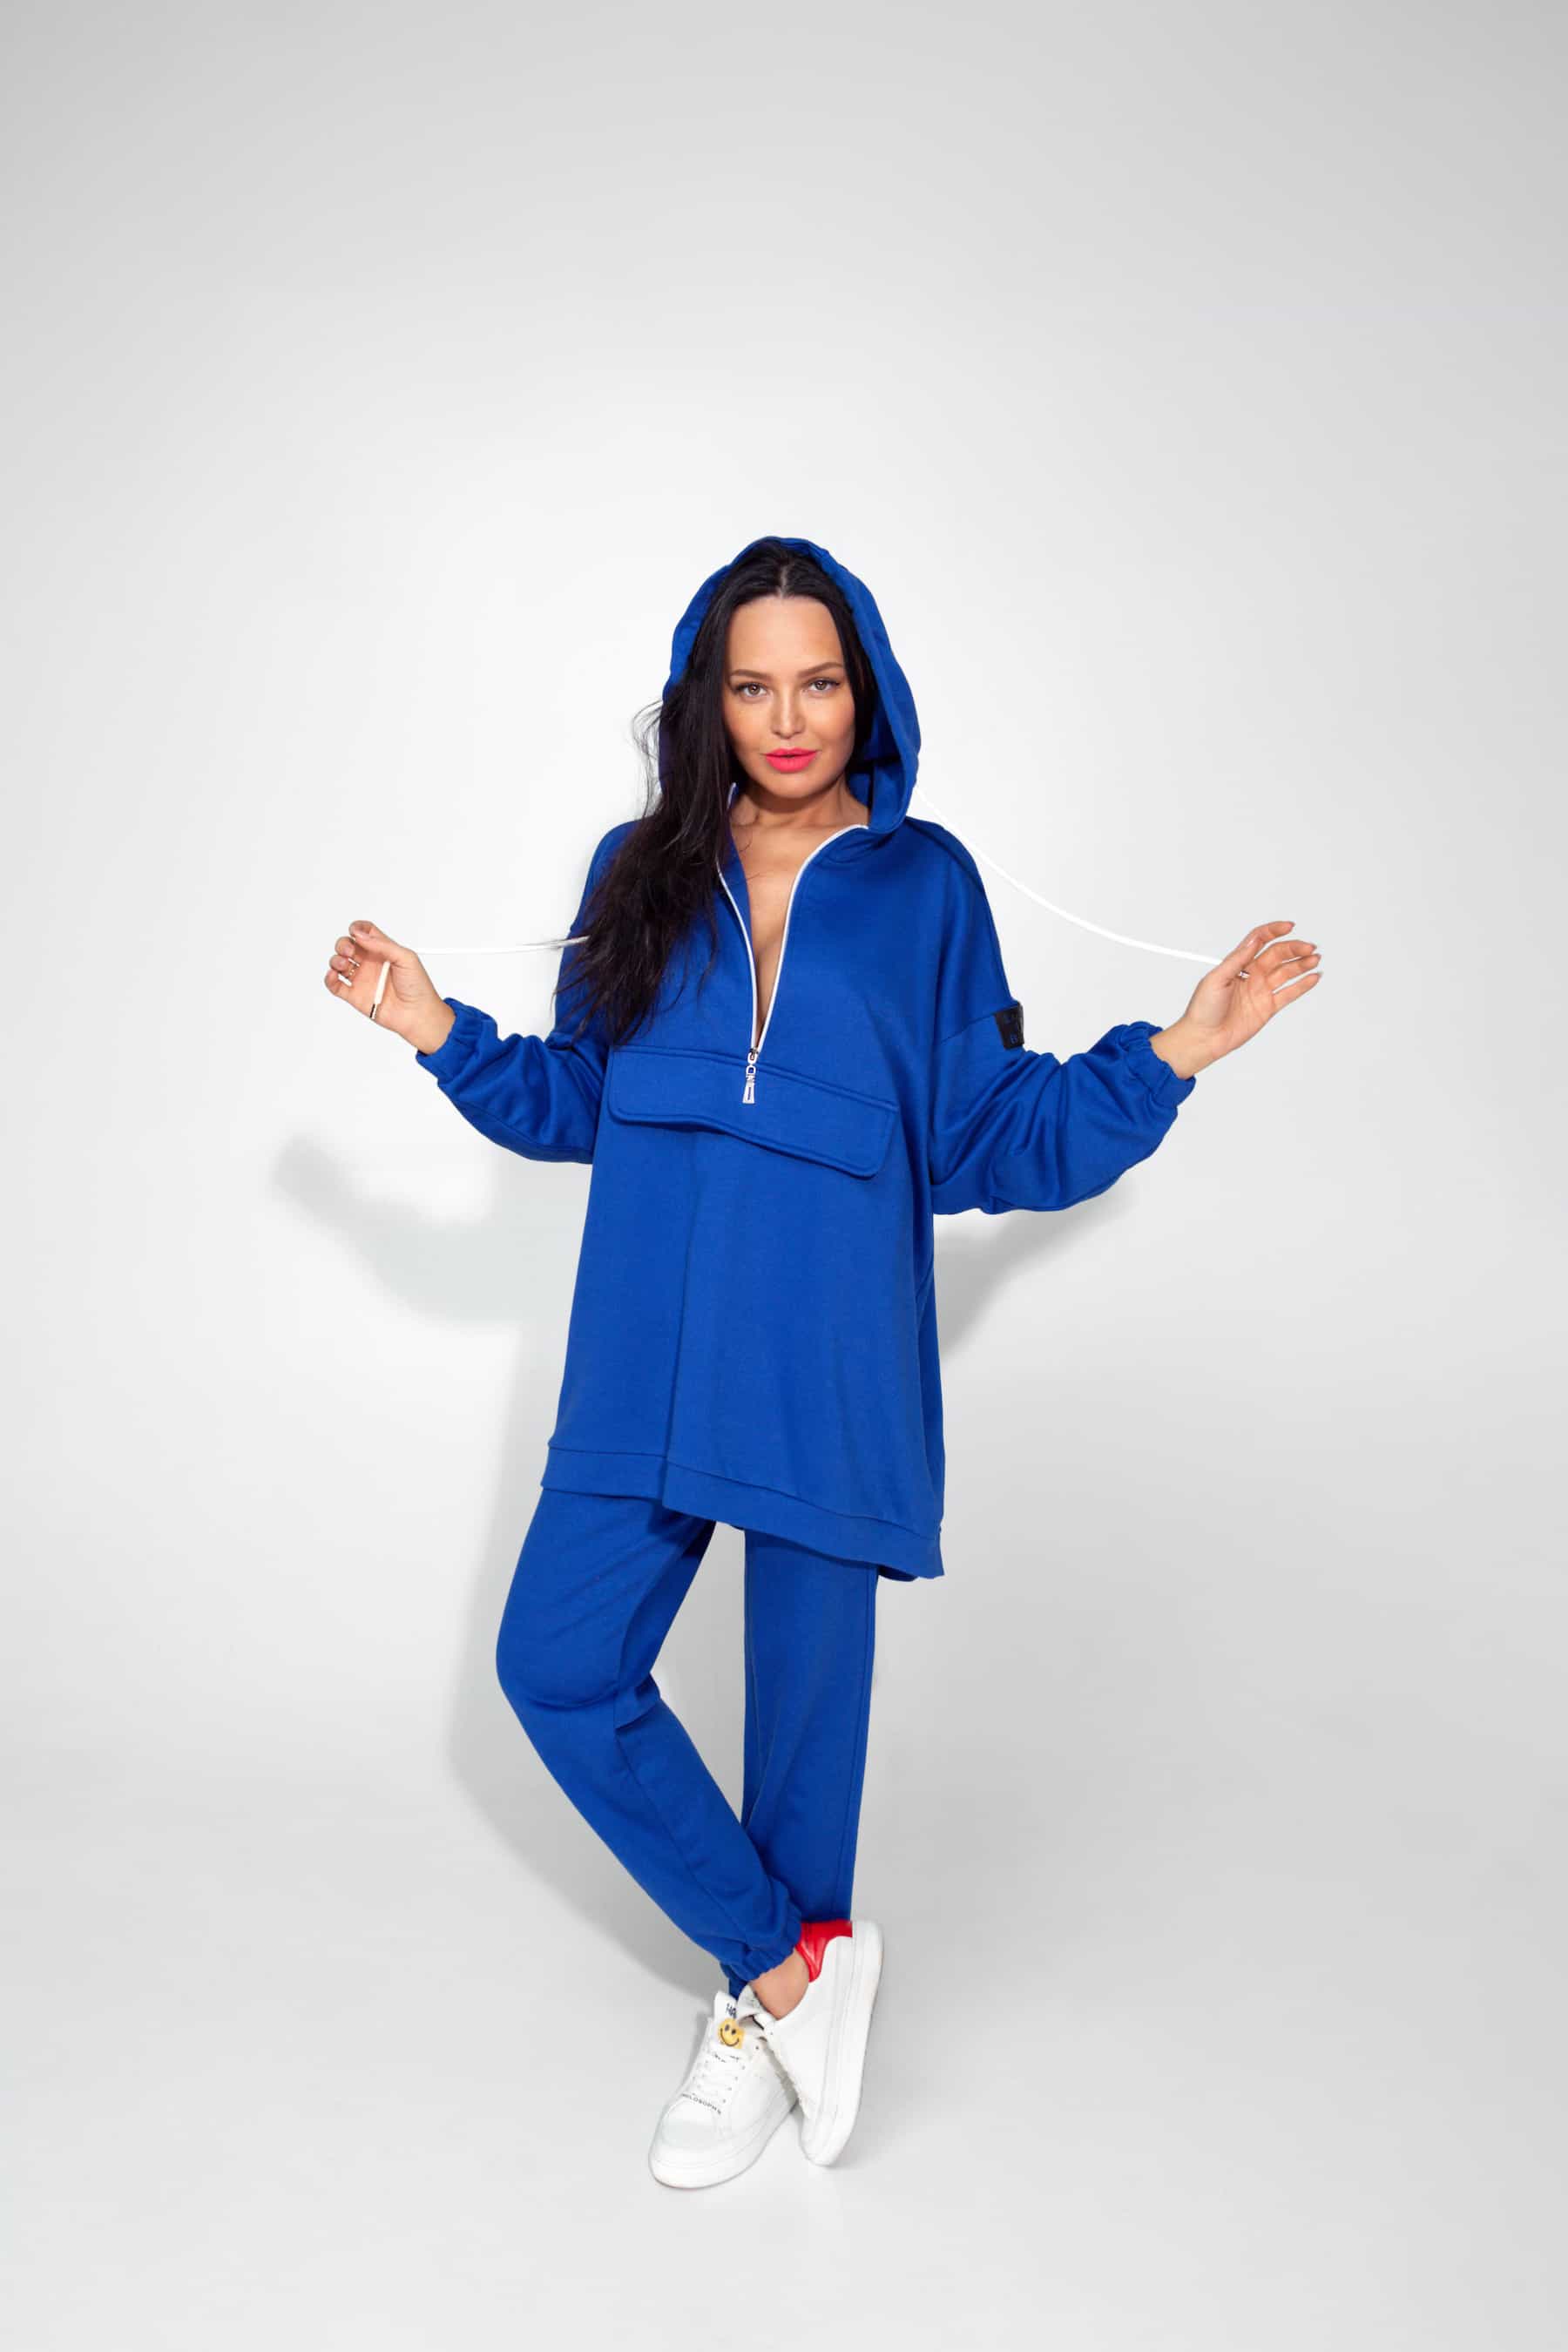 Sports suit in electric blue color.